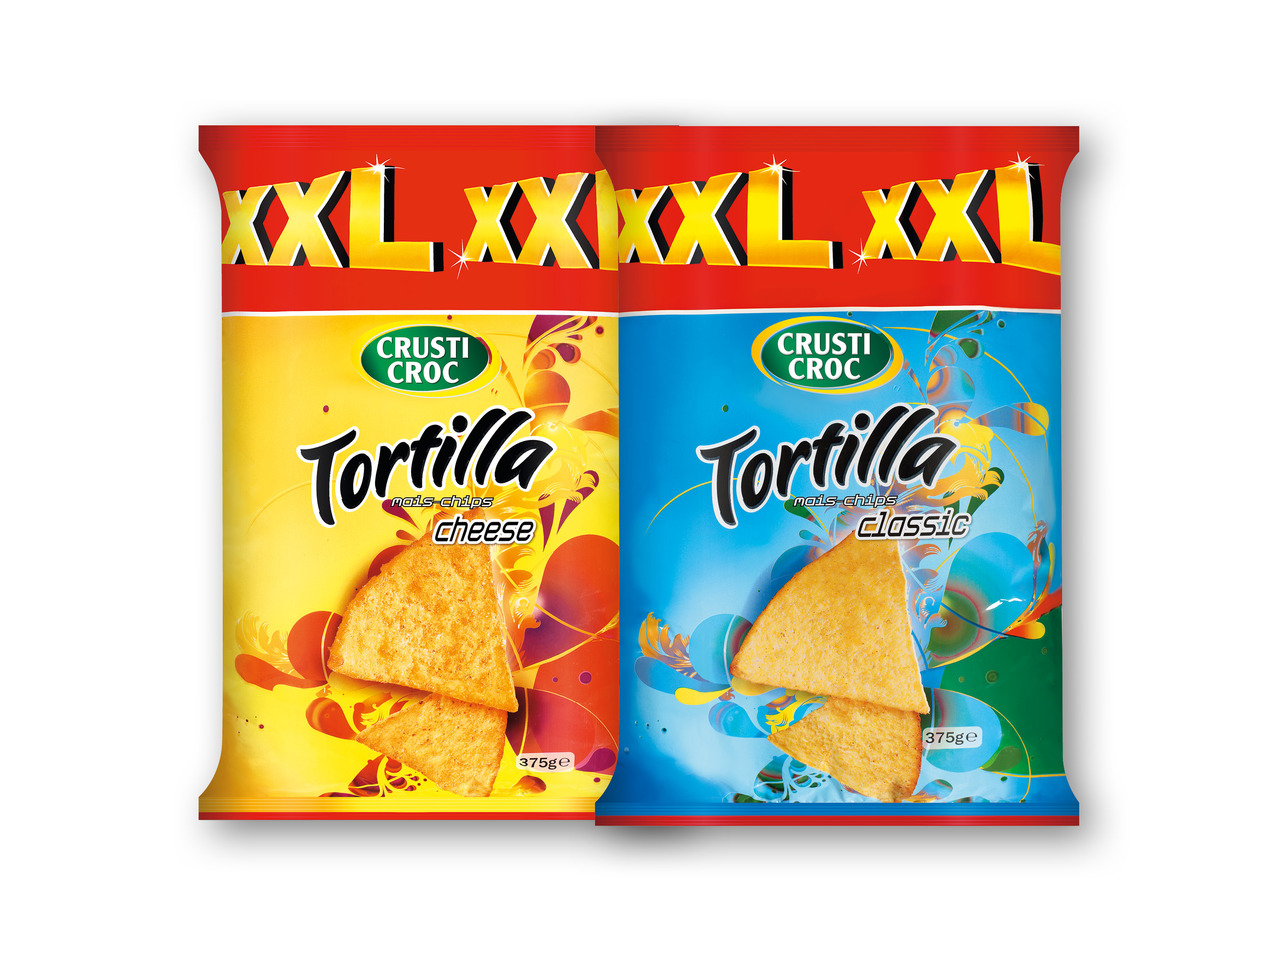 SNACK DAY Tortillachips